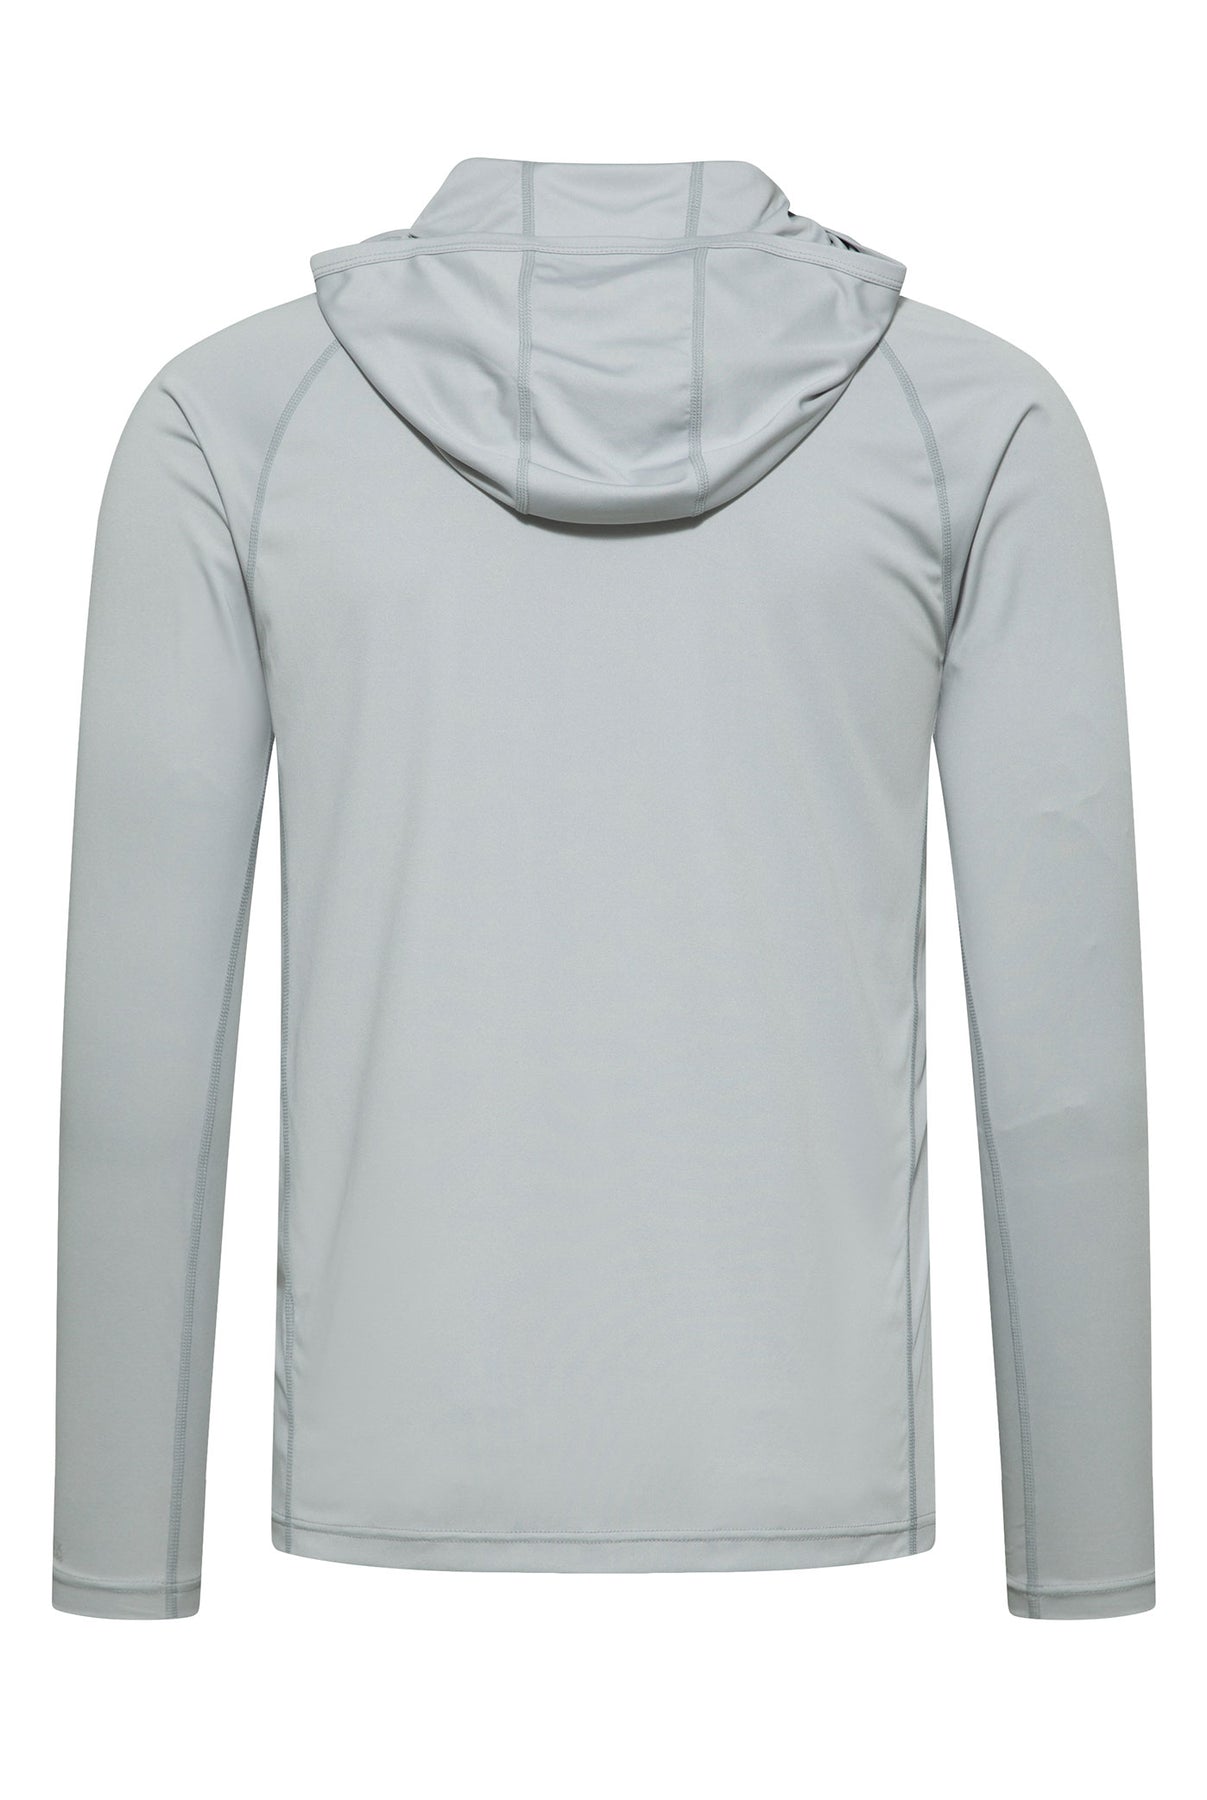 Inadays Men's UPF 50 Sun Protection Hoodie Shirts Long, 56% OFF